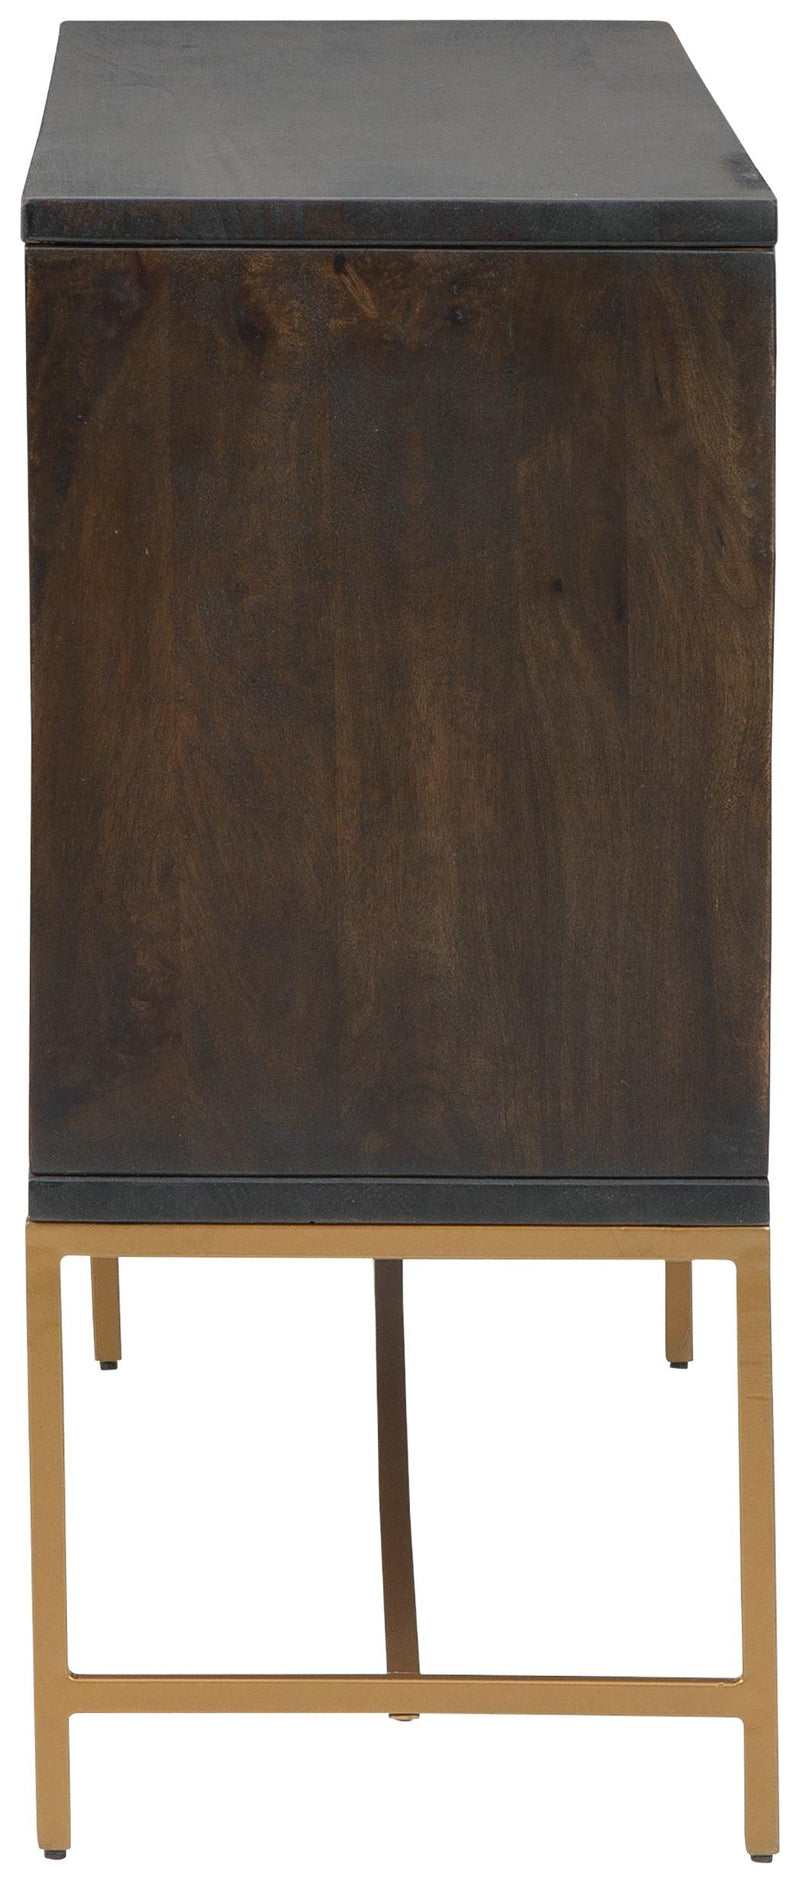 Elinmore Brown/gold Finish Accent Cabinet